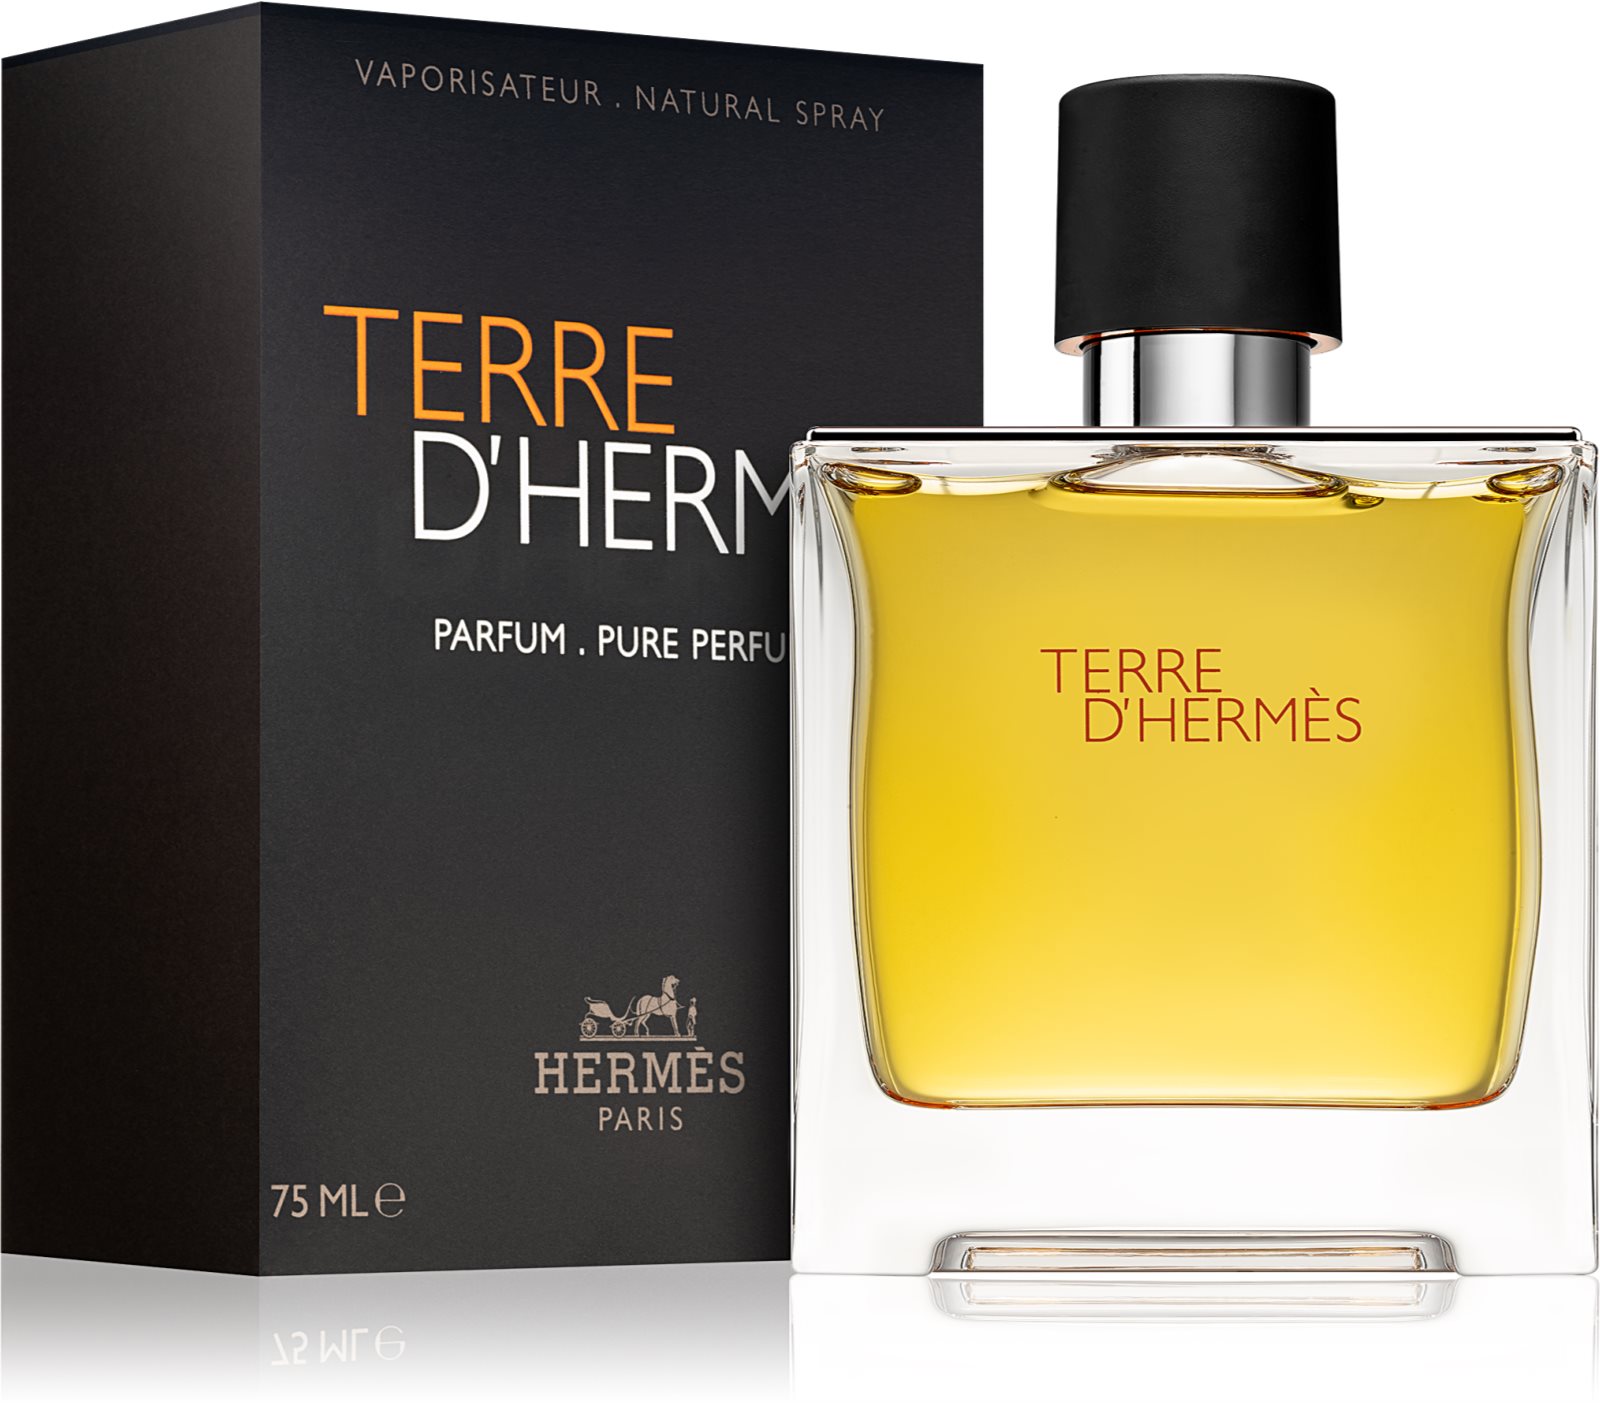 Top 10 parfums homme notino.fr